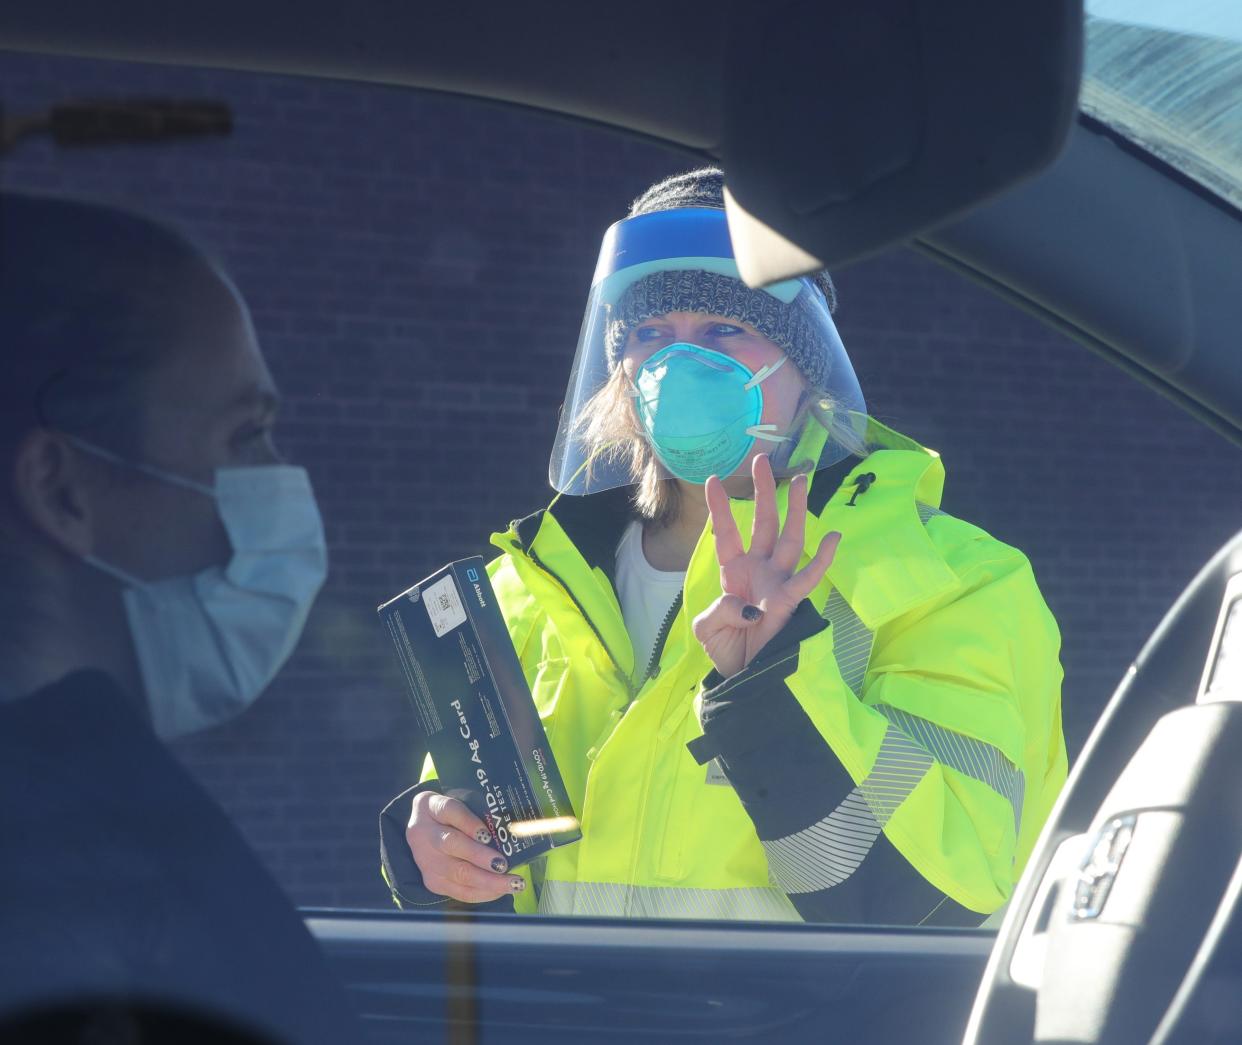 Summit County public health worker Marlene Martin asks a driver how many passengers are in her vehicle before handing out free coronavirus testing kits Jan. 8 in Akron, Ohio.